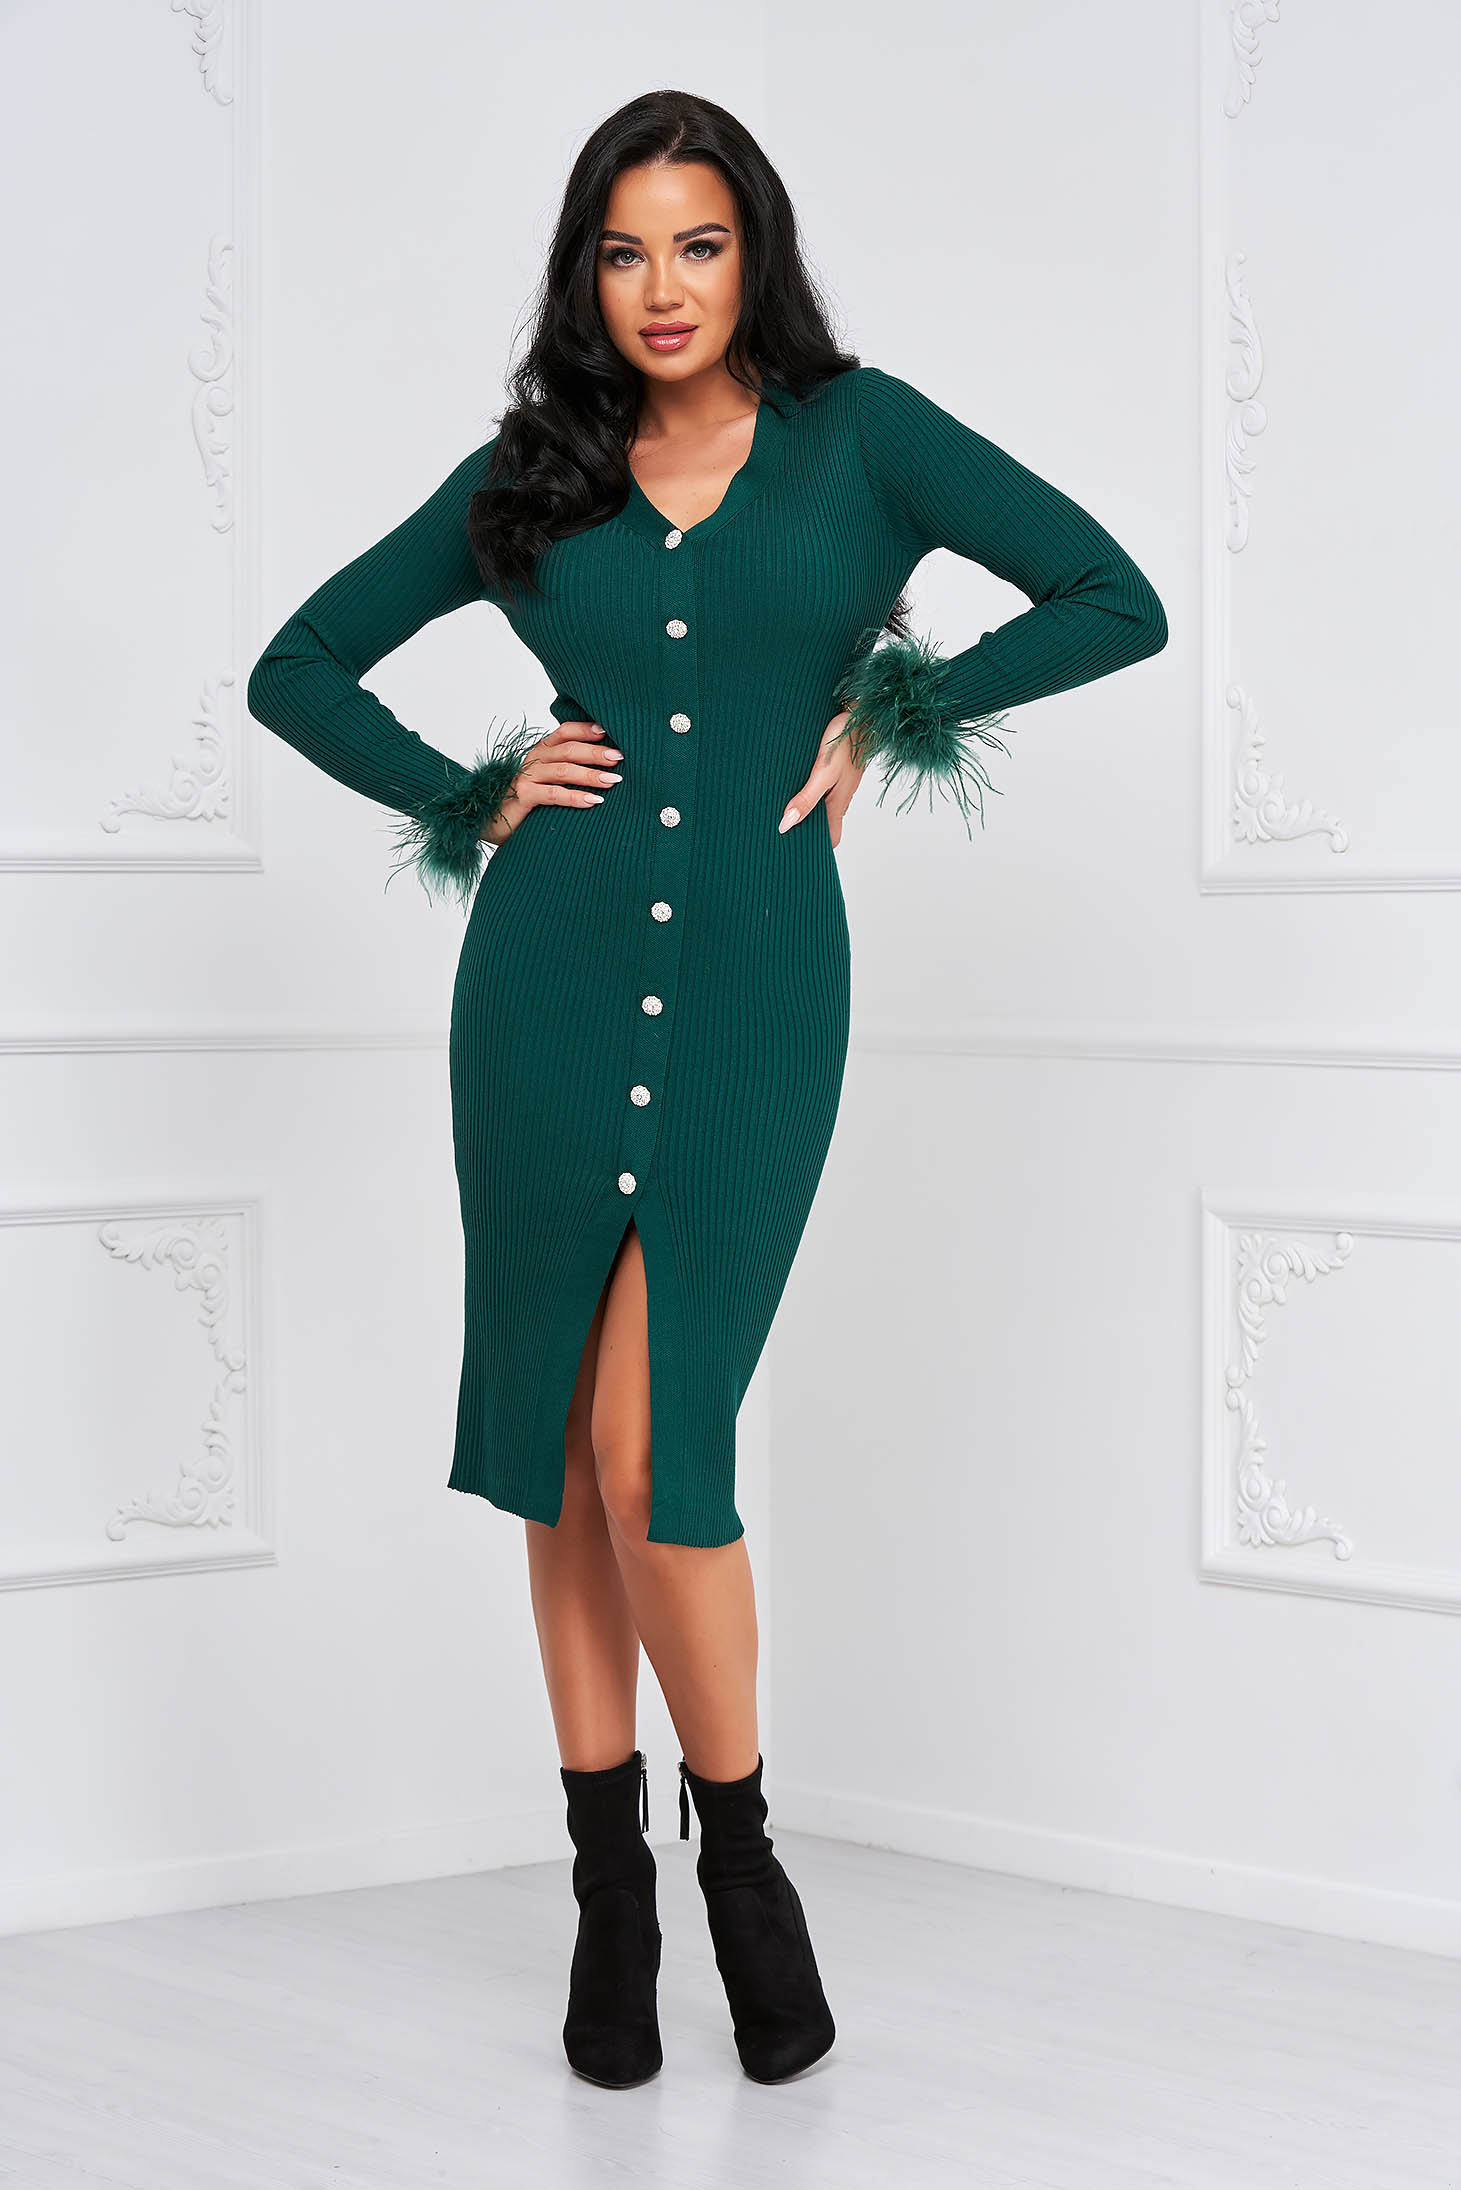 Darkgreen dress knitted midi feather details from striped fabric